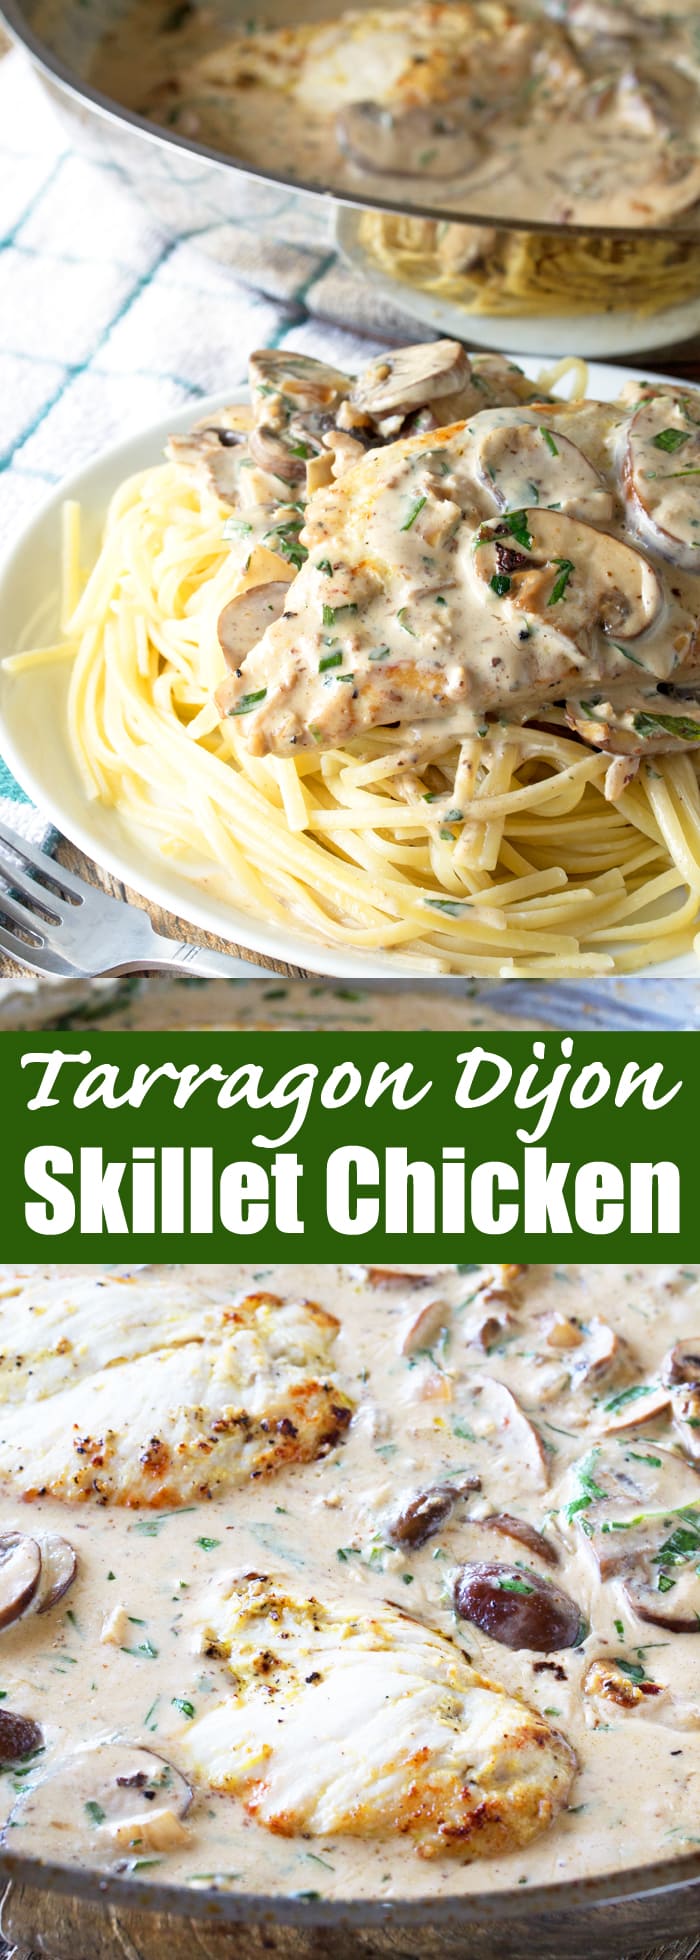 This easy skillet chicken dish gets elevated with the flavor of fresh tarragon. Creamy Tarragon Dijon Skillet Chicken is a 30 minute meal you will want to eat every day!